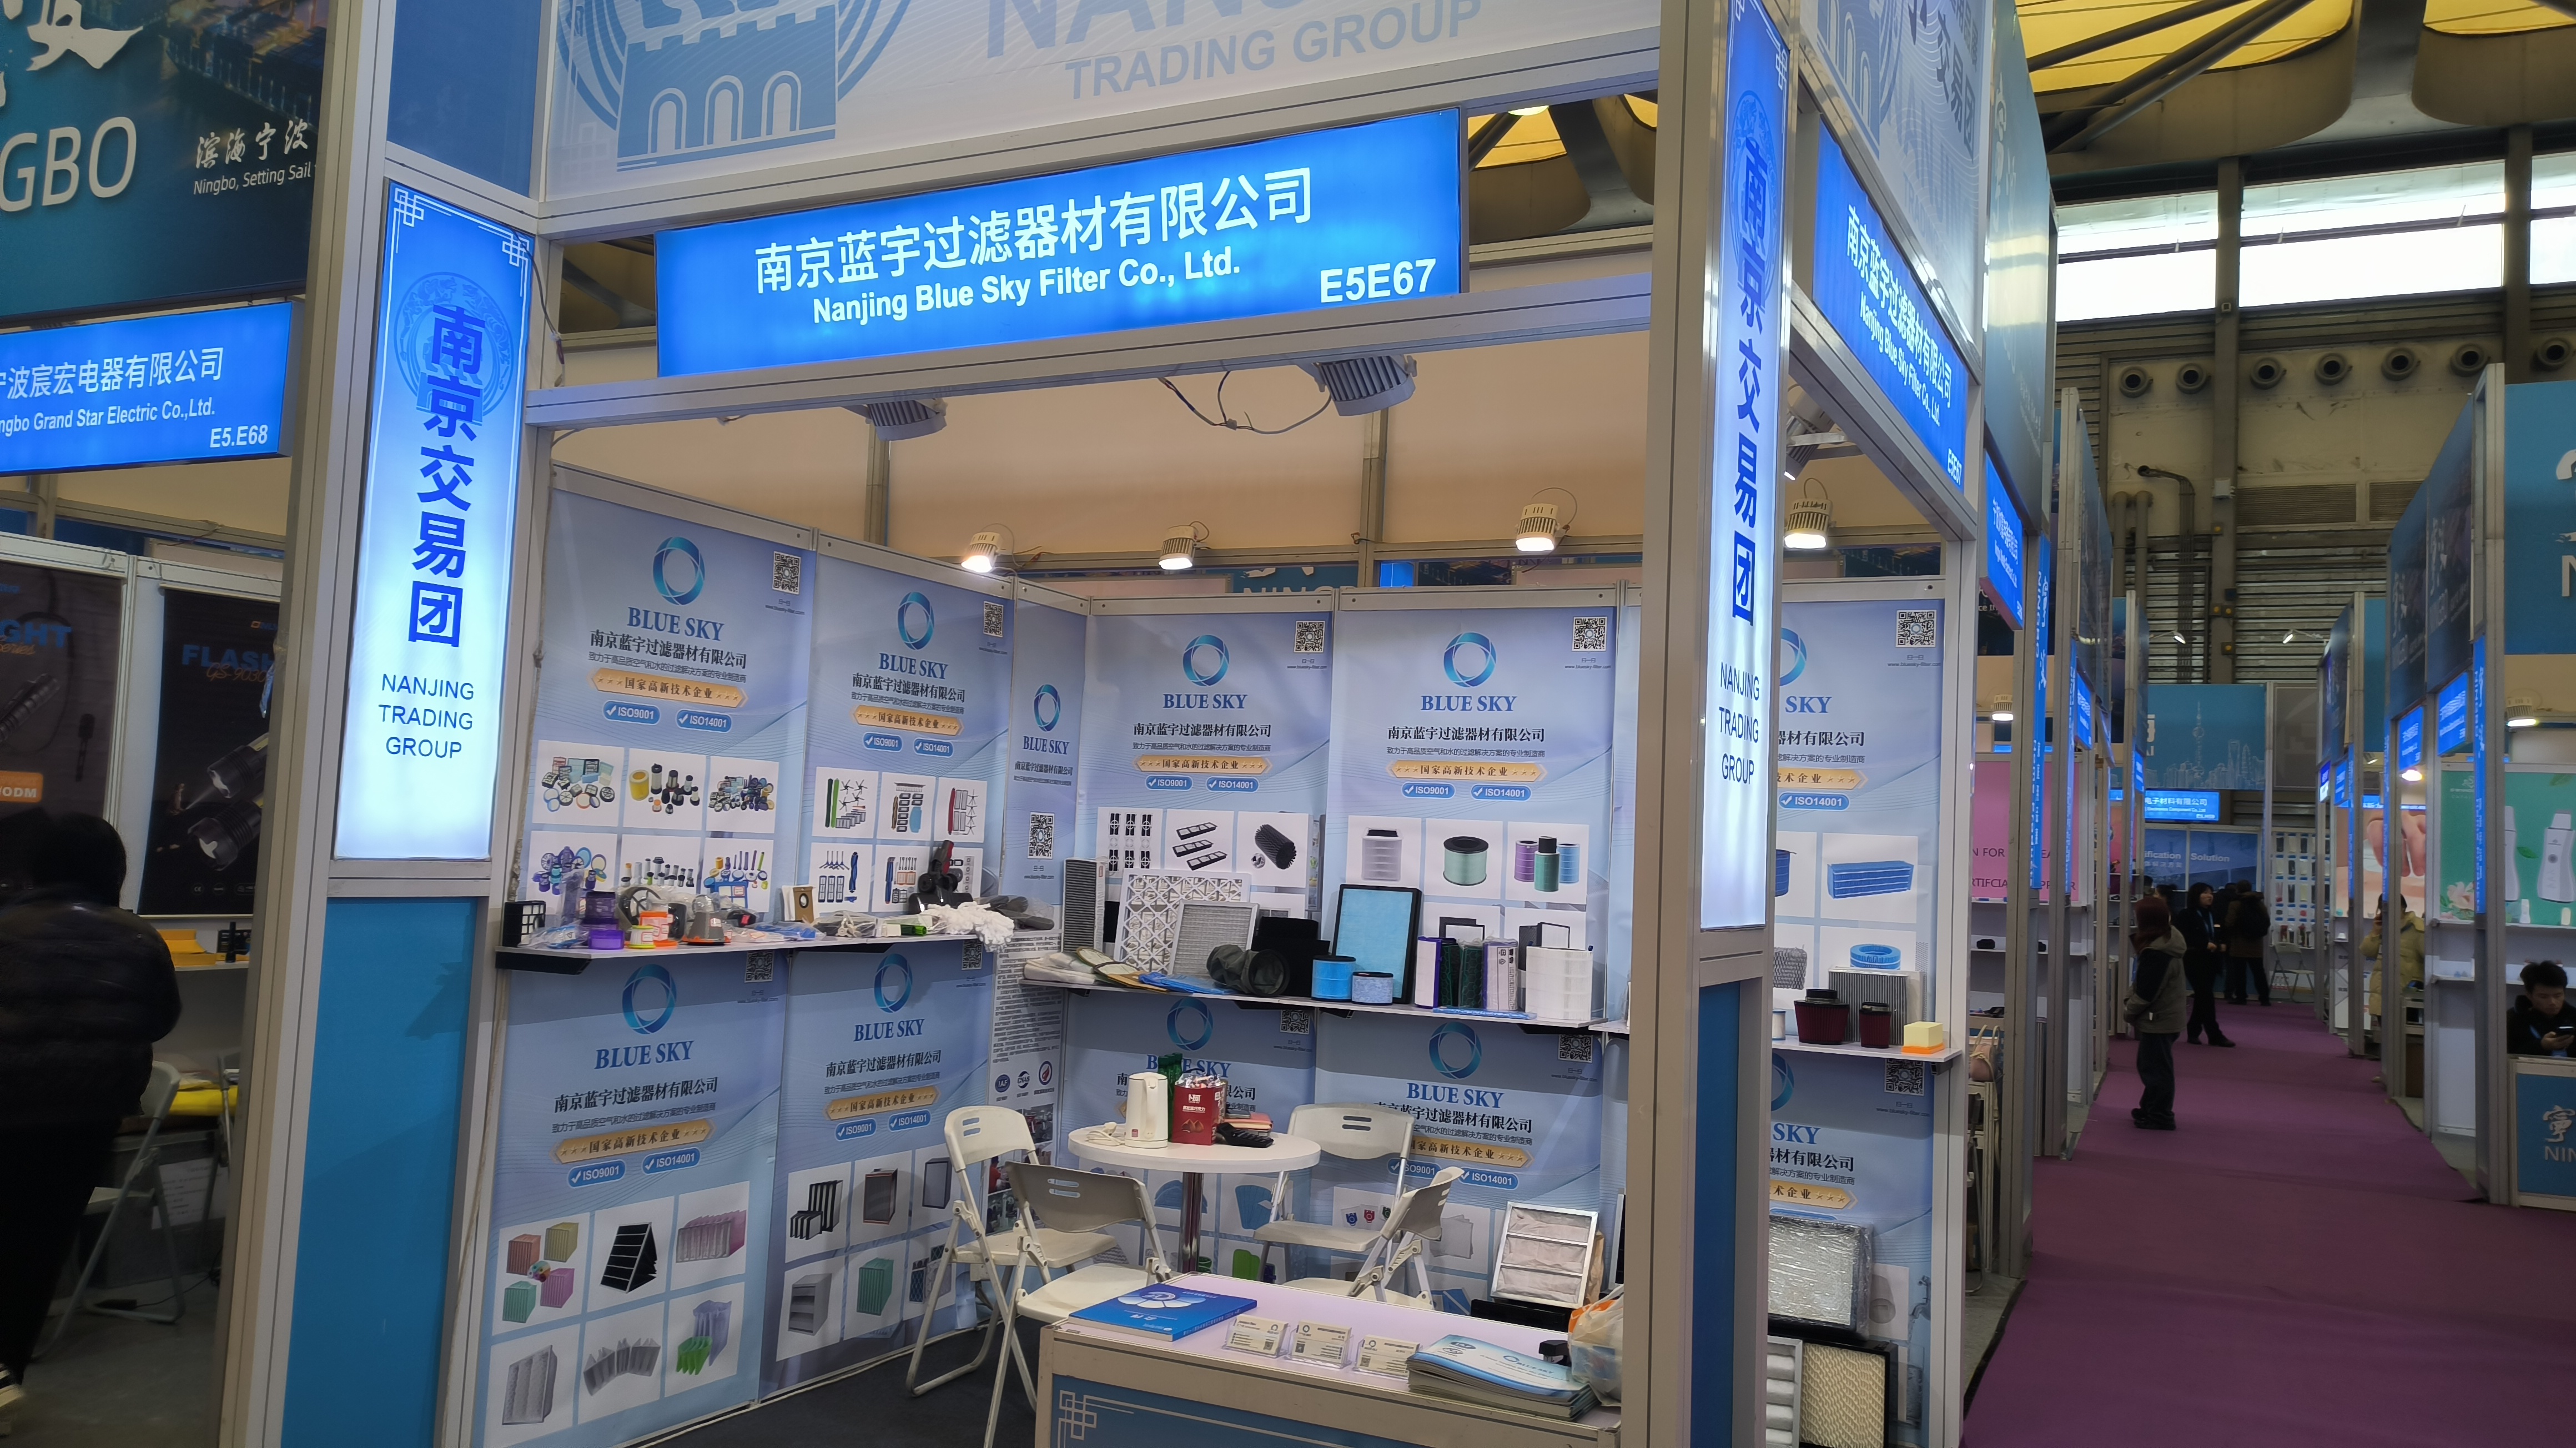 Participation in the East China Fair: Opportunities and challenges for Nanjing Blue Sky Filter Co., Ltd.